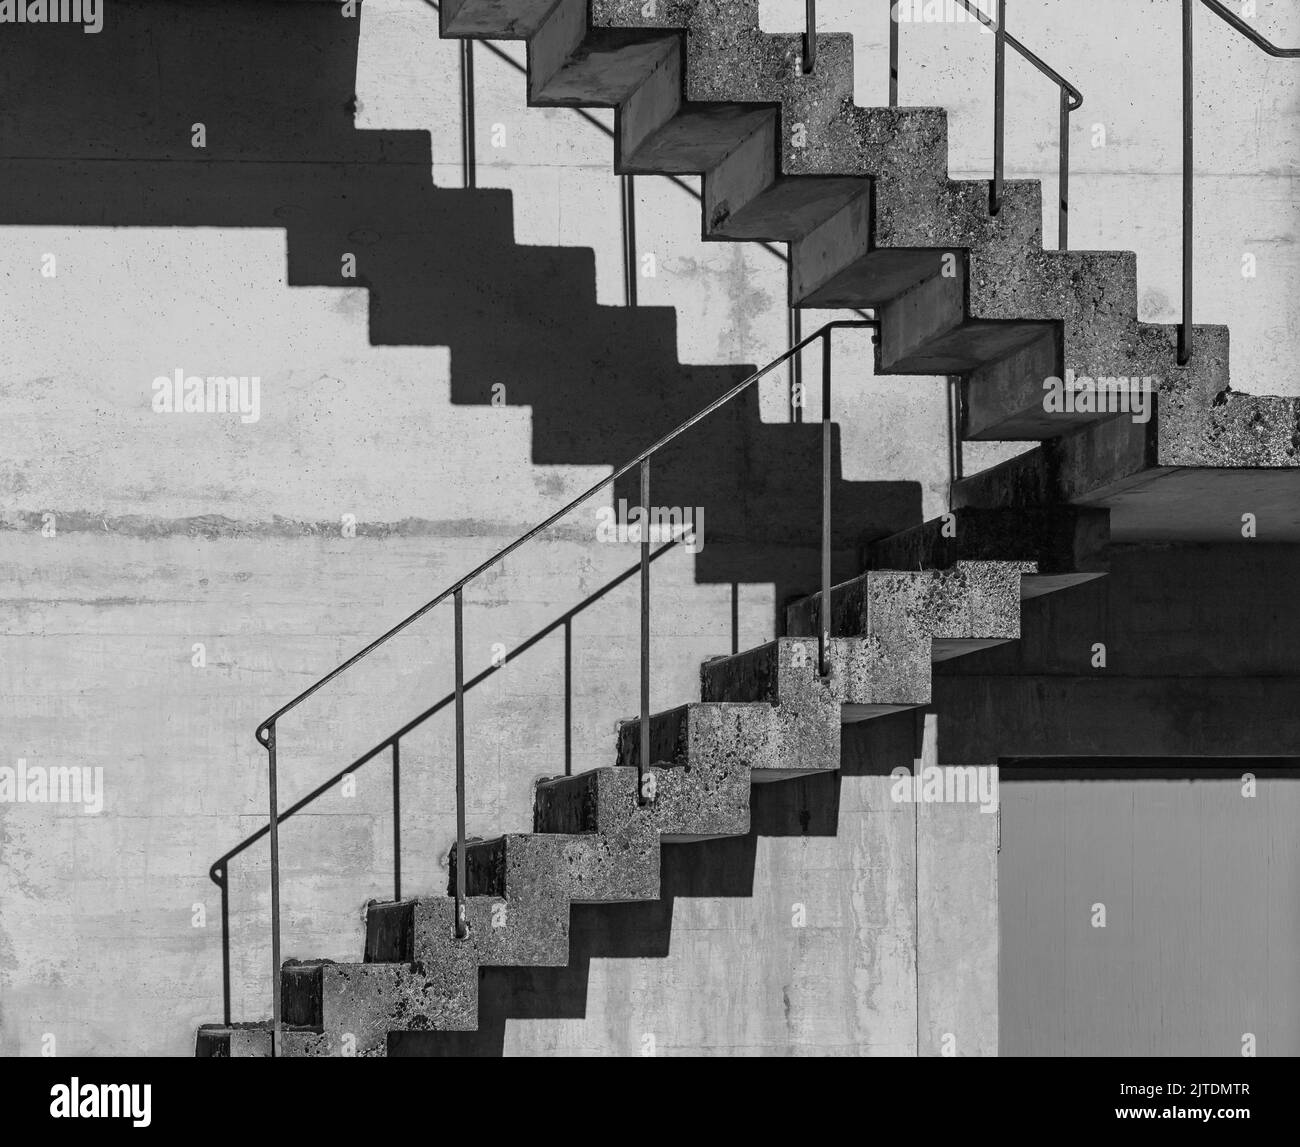 Abstract architecture background, square concrete stairway perspective, stairwell, black and white photo. Minimalism architecture. Modern architecture Stock Photo